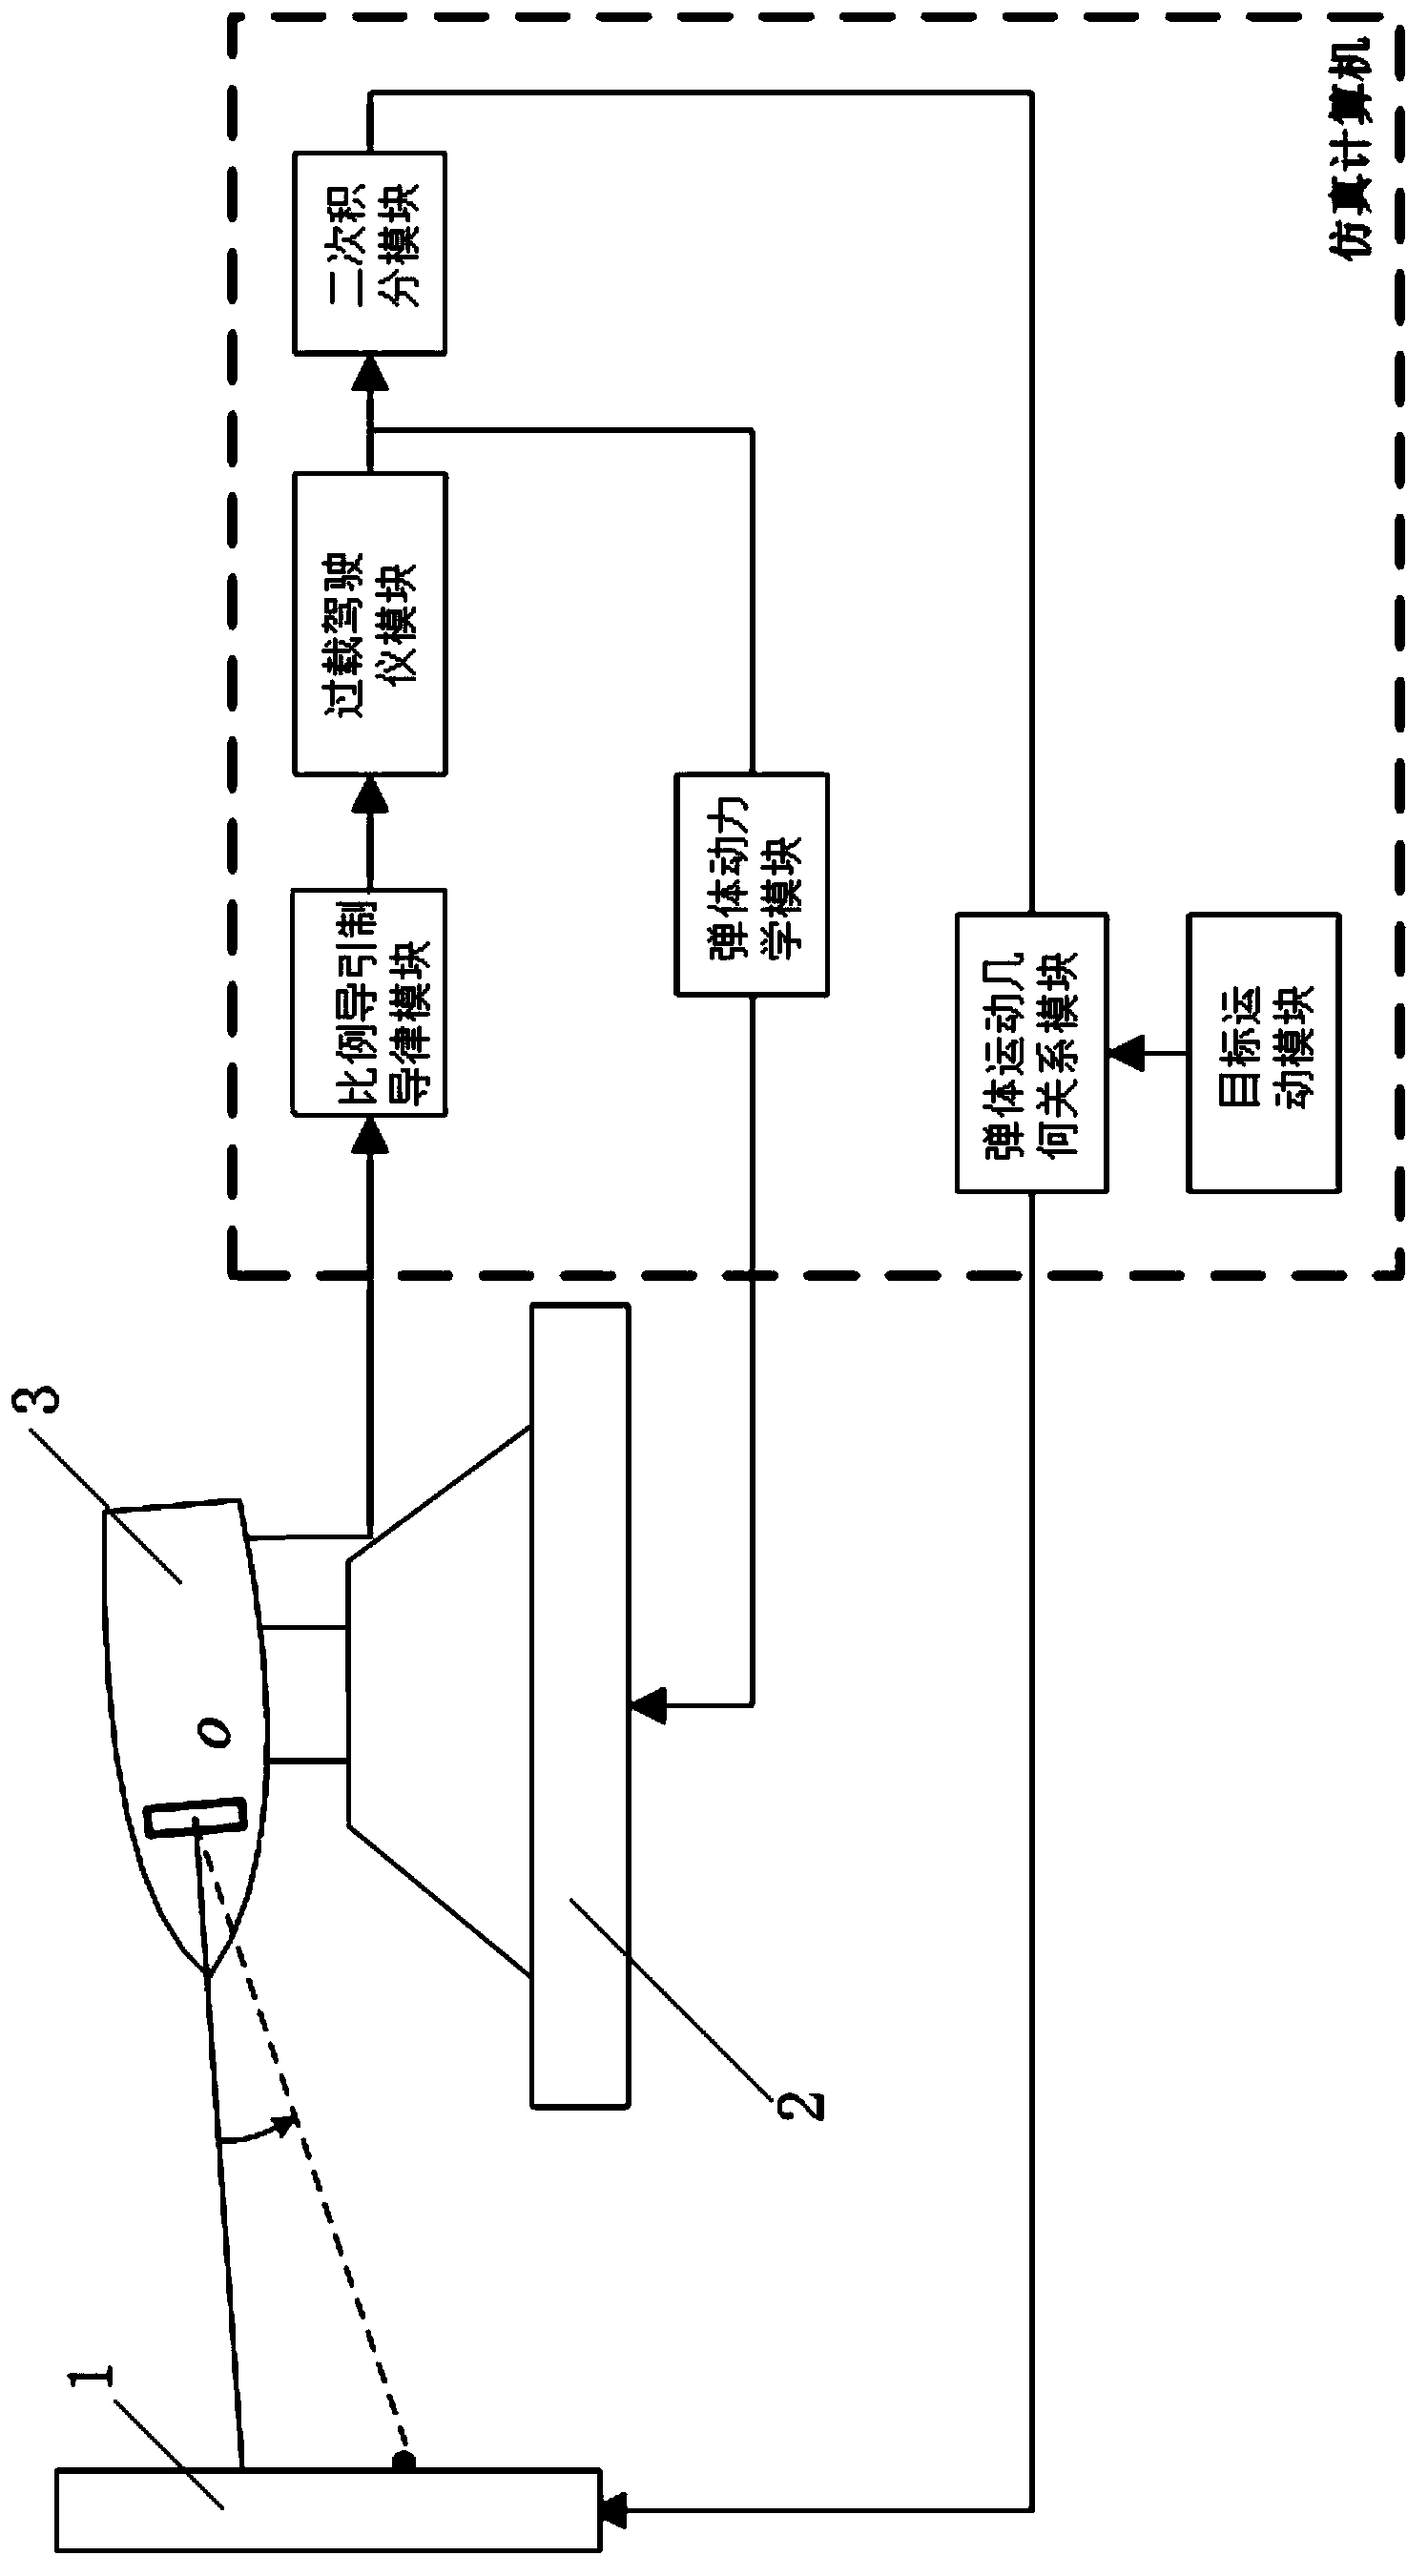 System for evaluating disturbance rejection rate parasitical loop of strap down infrared seeker